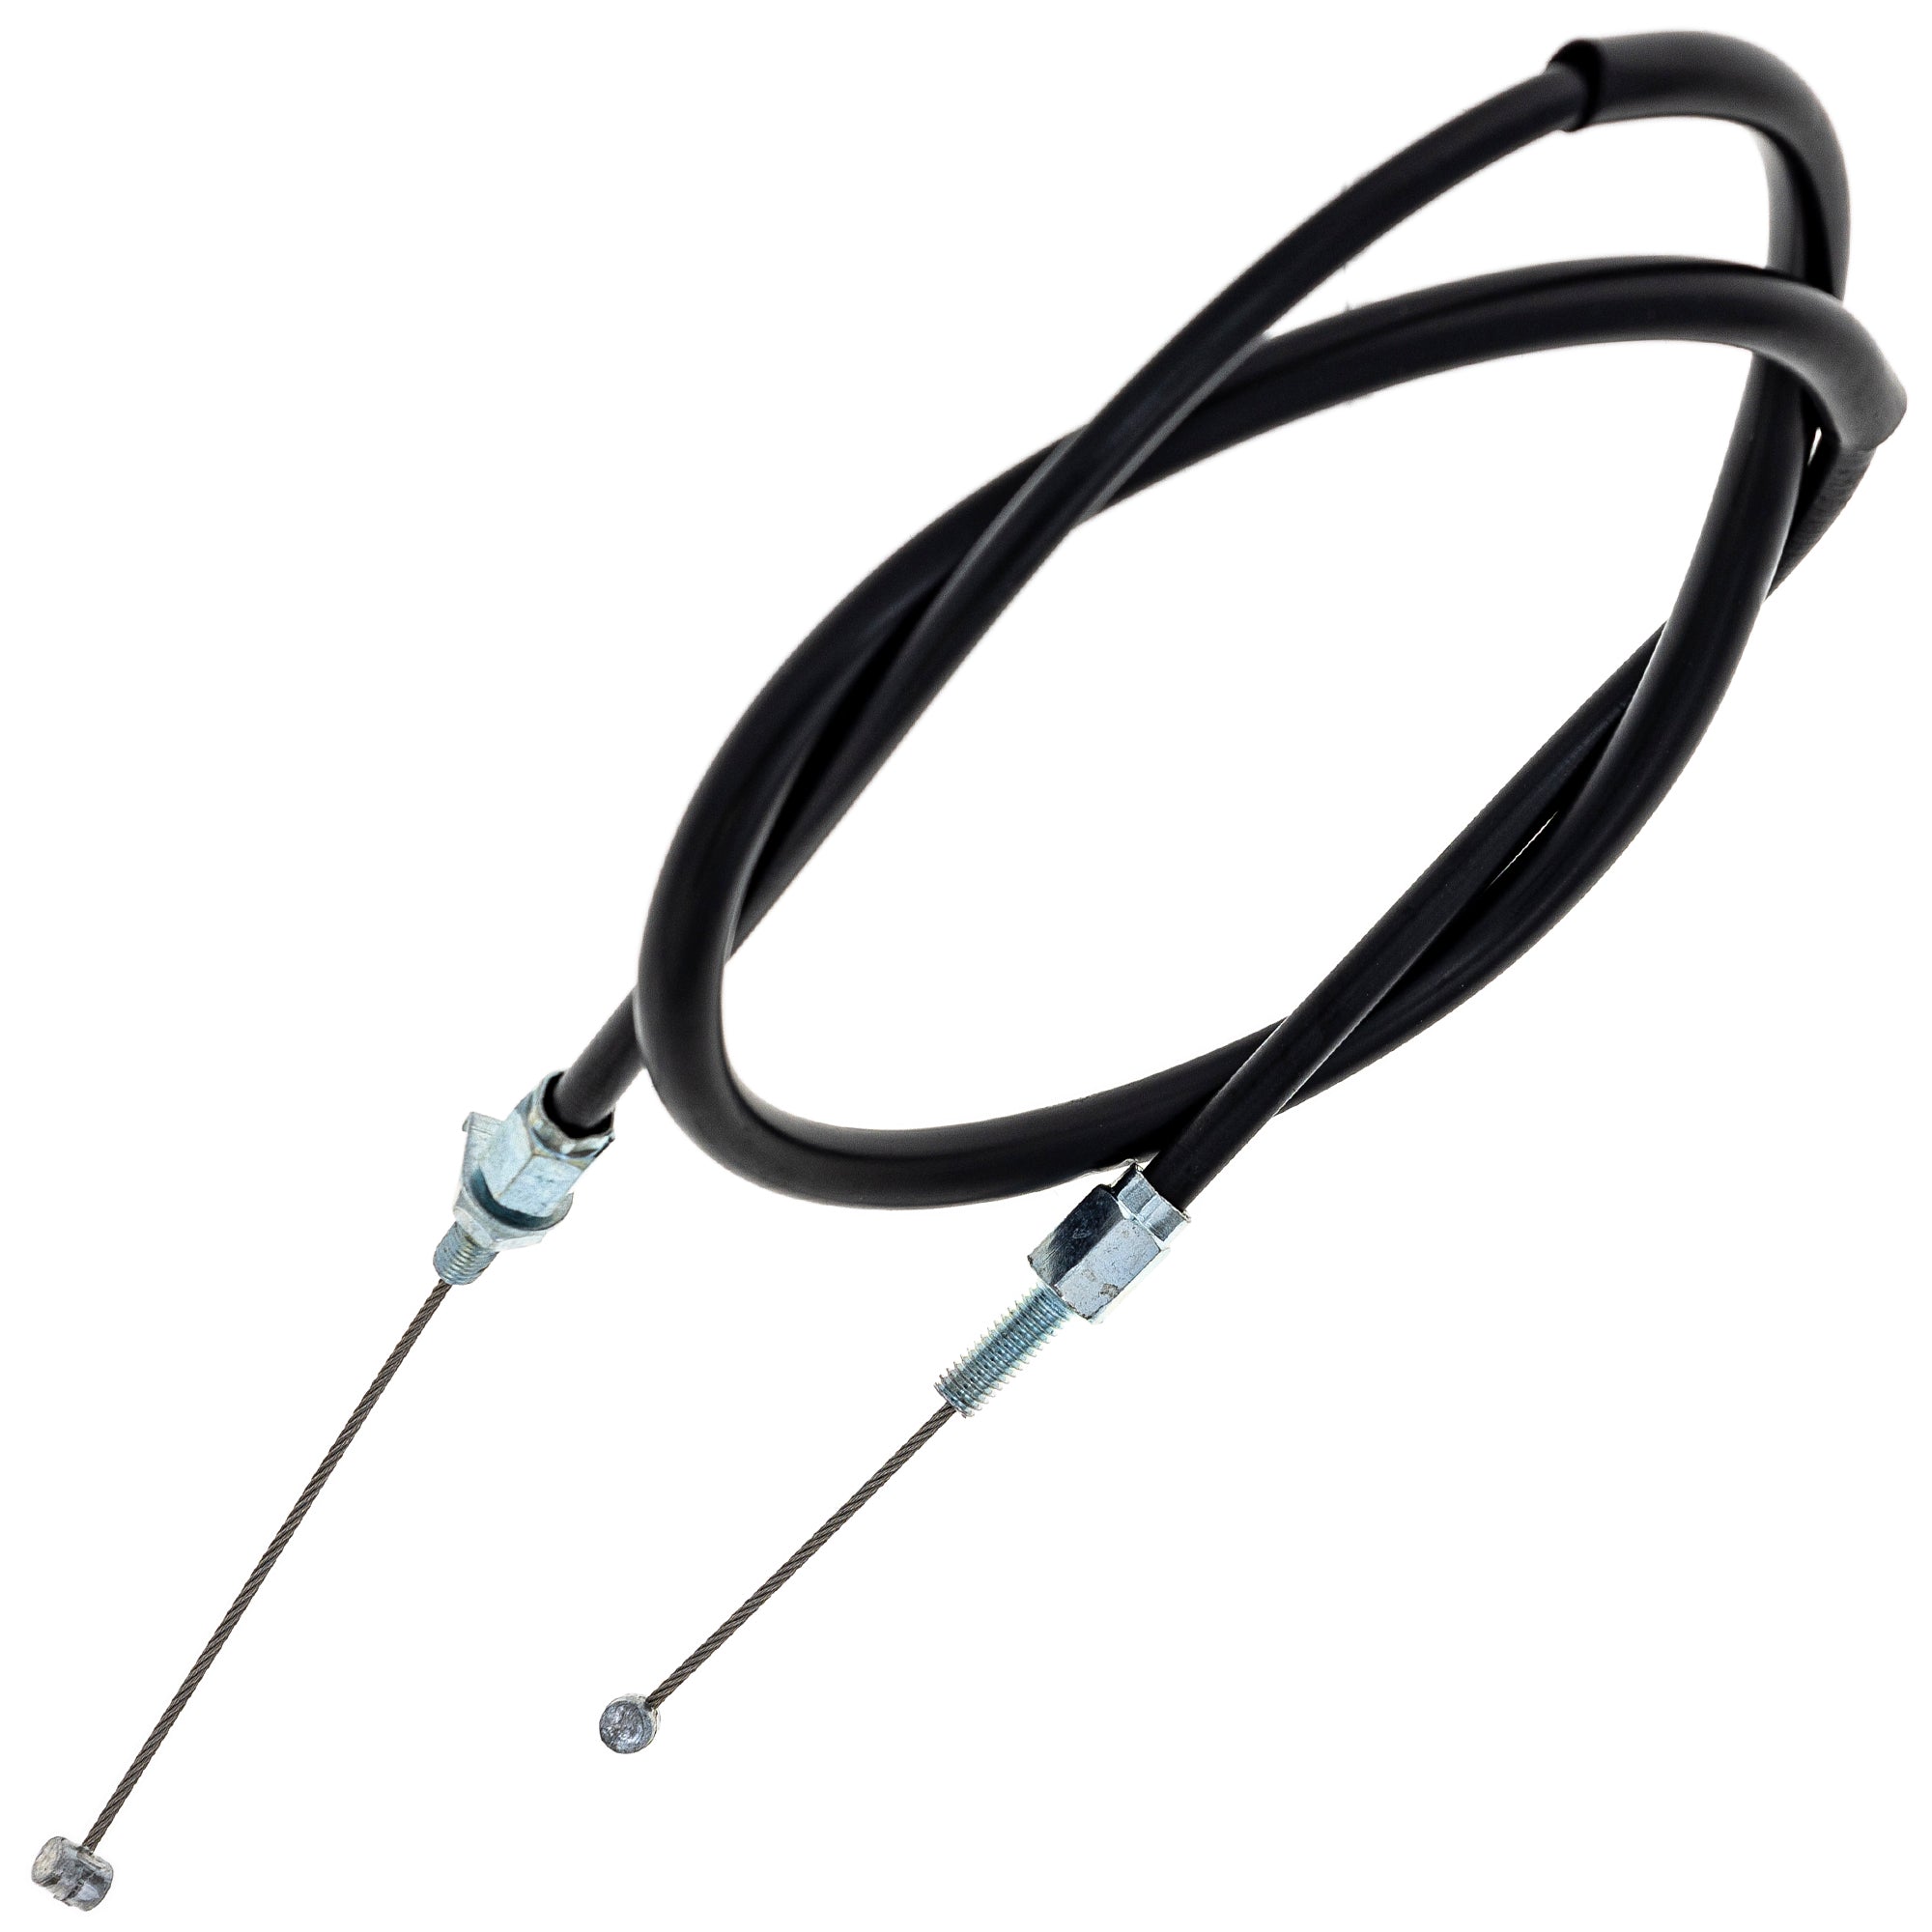 Push Throttle Cable for Honda CRF150R 17920-KSE-000 Motorcycles